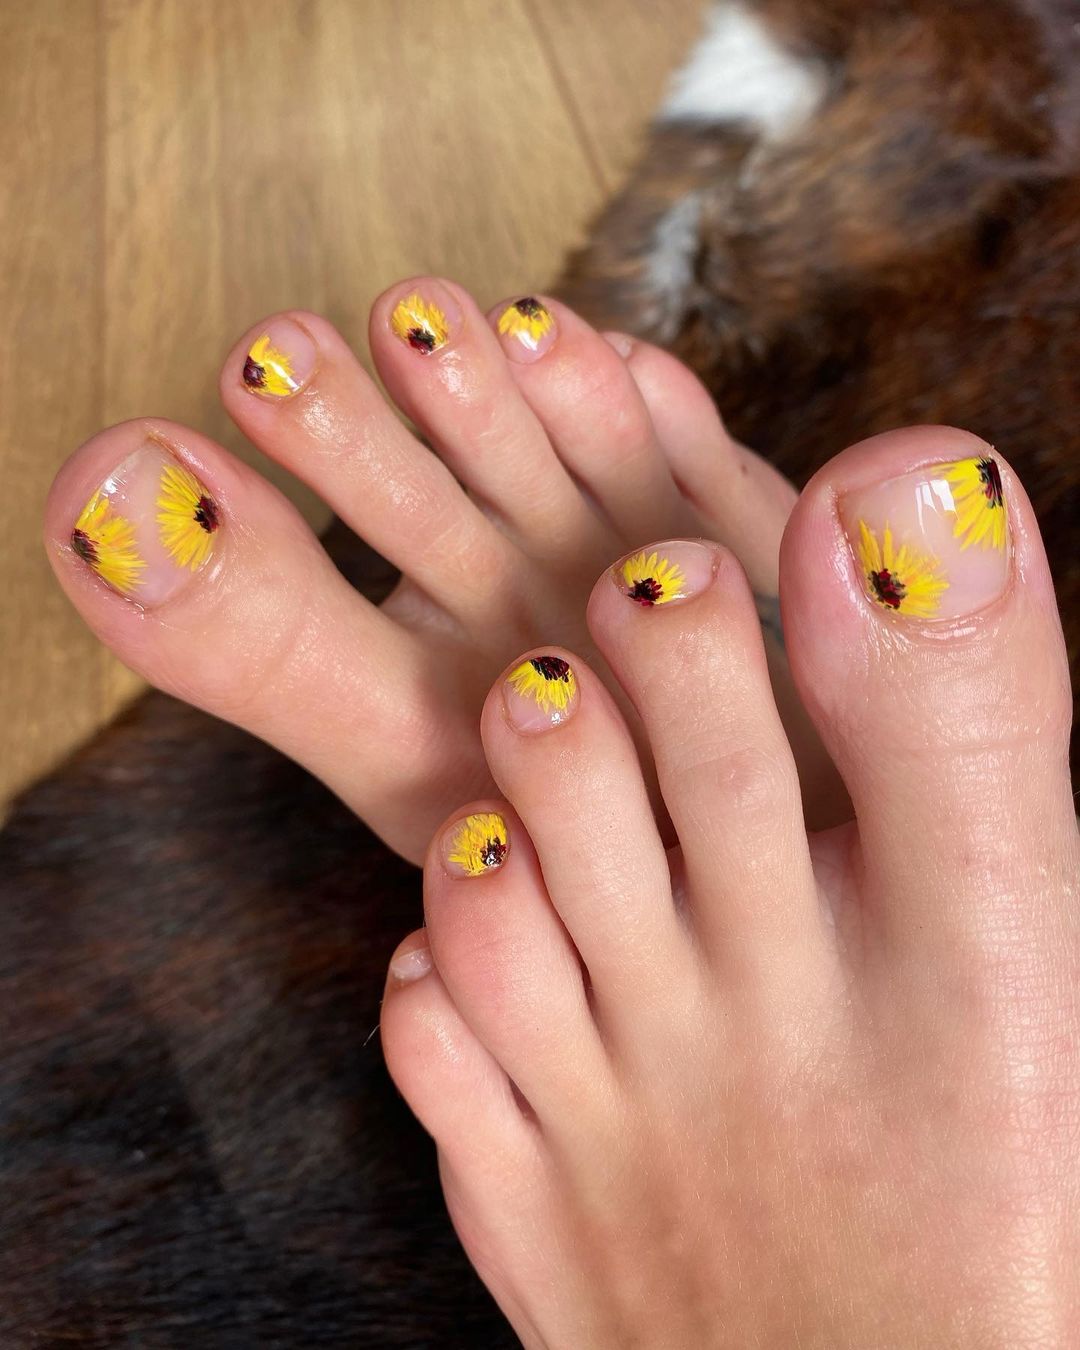 Over 100 Incredible Toe Nail Designs for Your Perfect Feet | Toe nail  designs, Pedicure designs, Spring pedicure